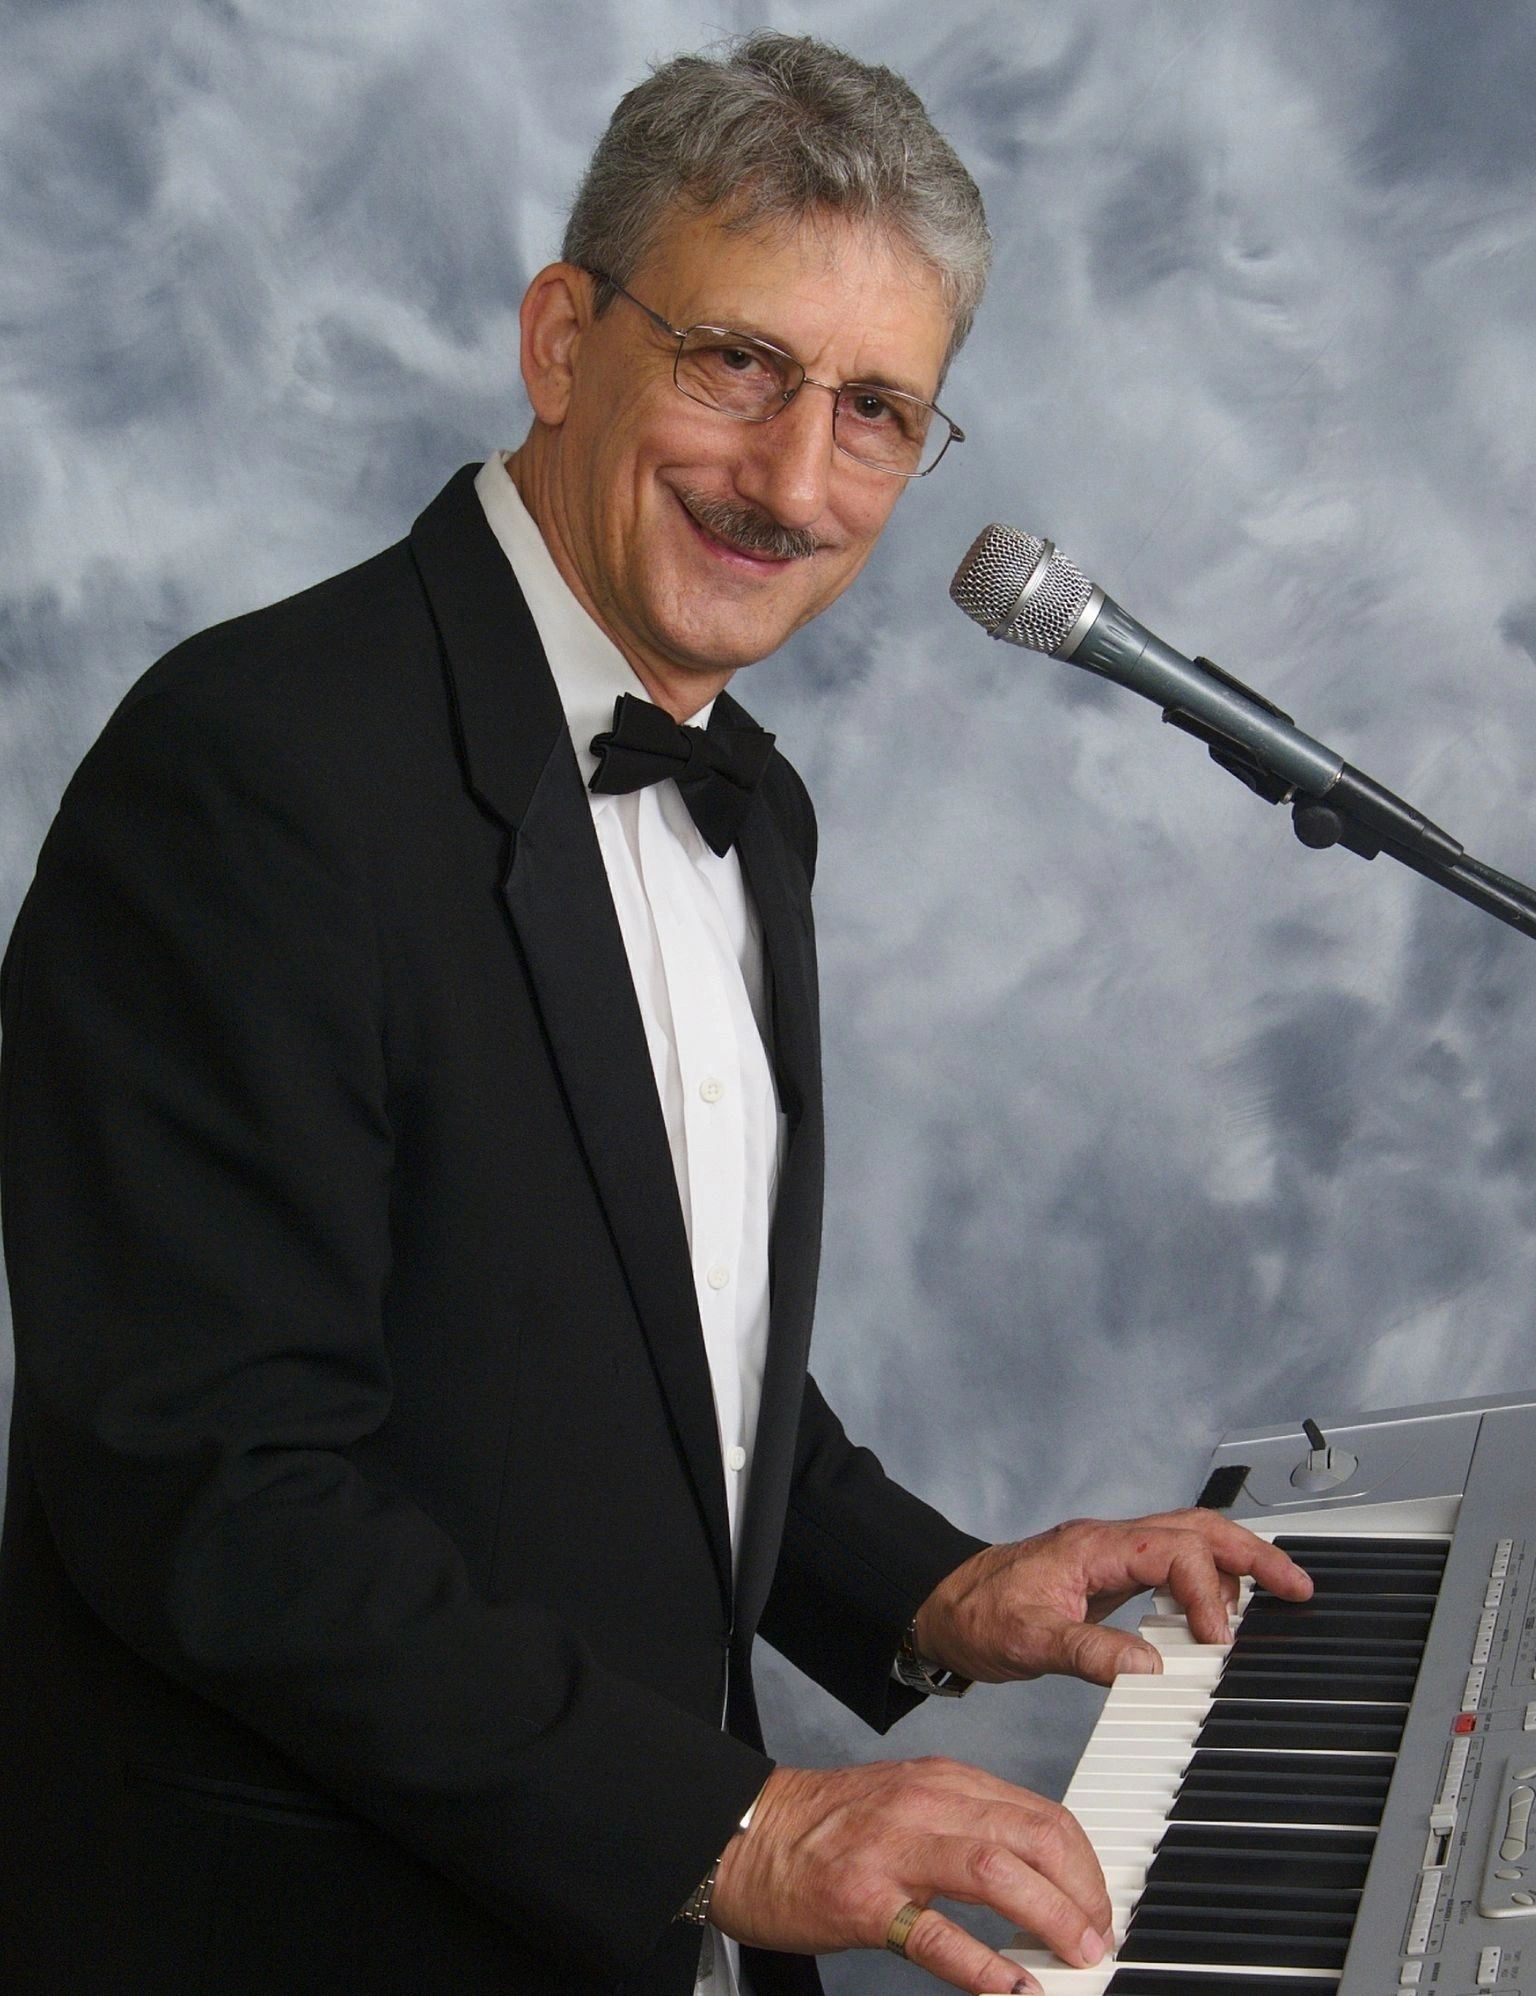 Keyboard Player and Singer